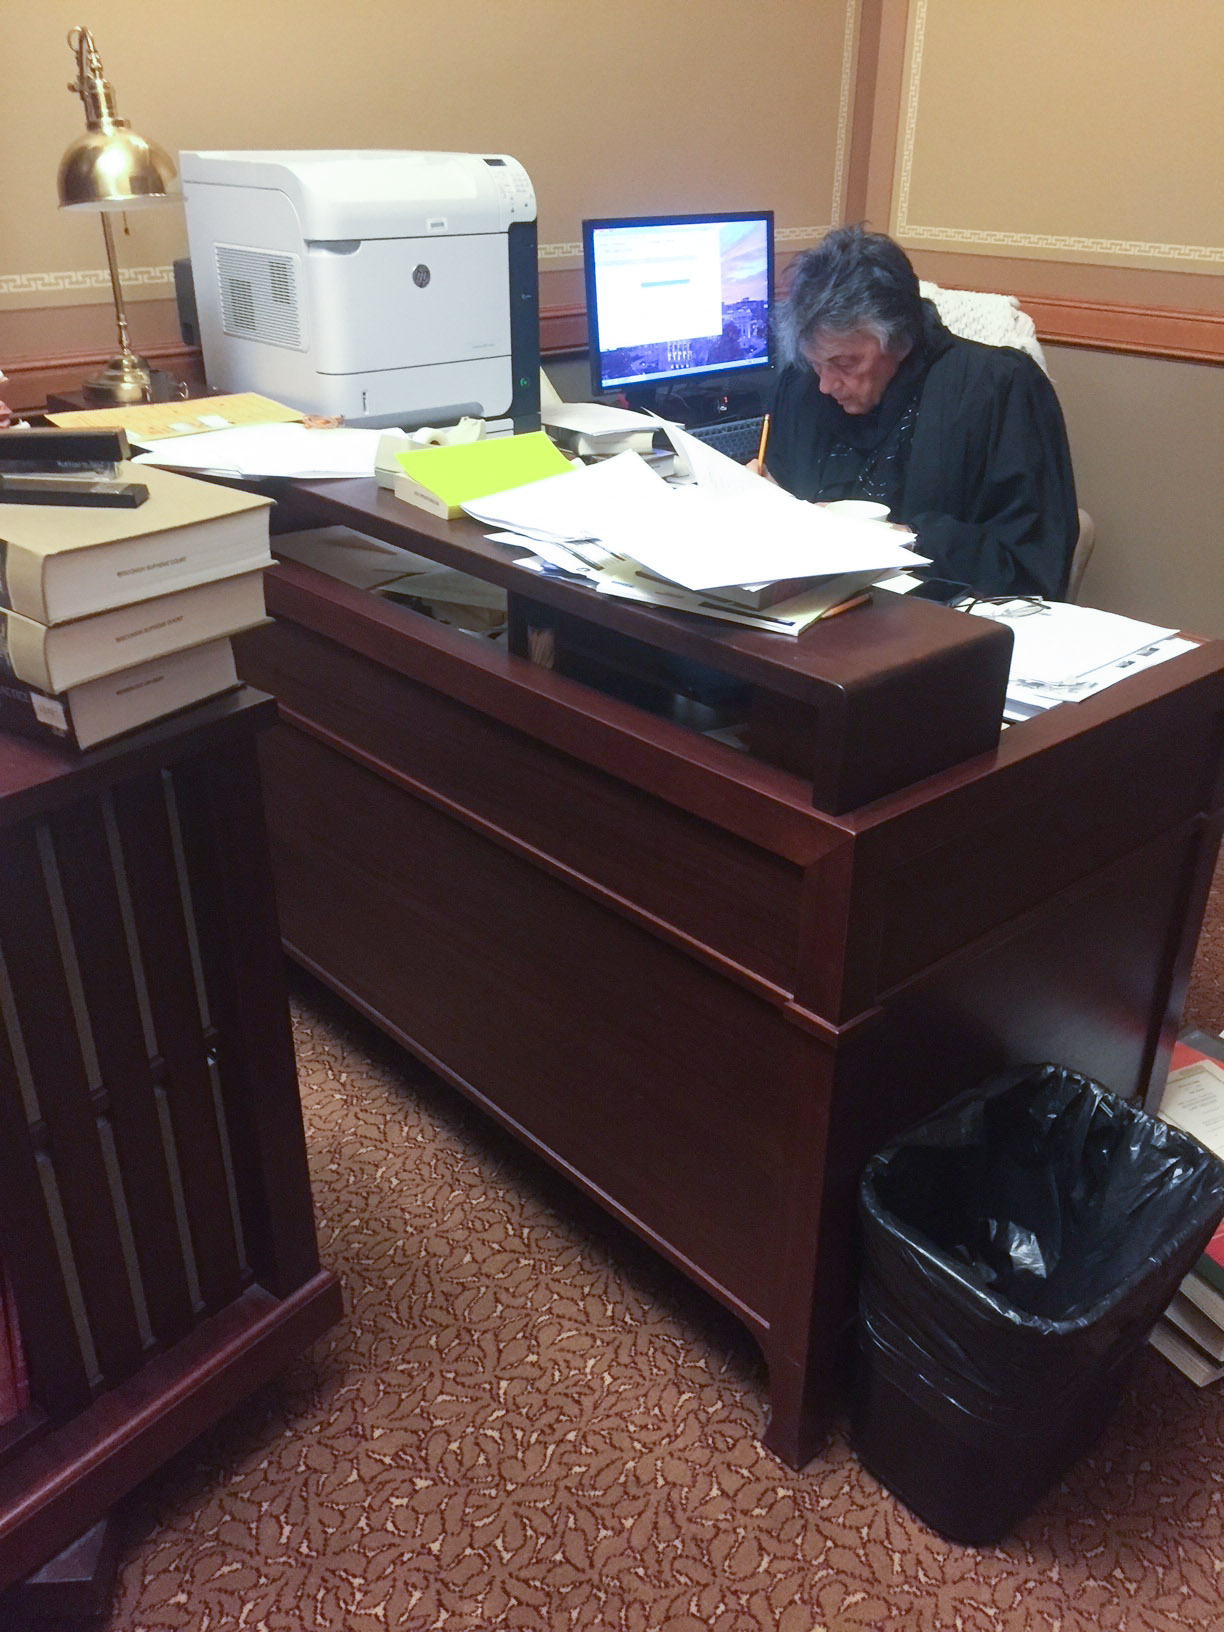 Justice Abrahamson, working at a paper-strewn desk